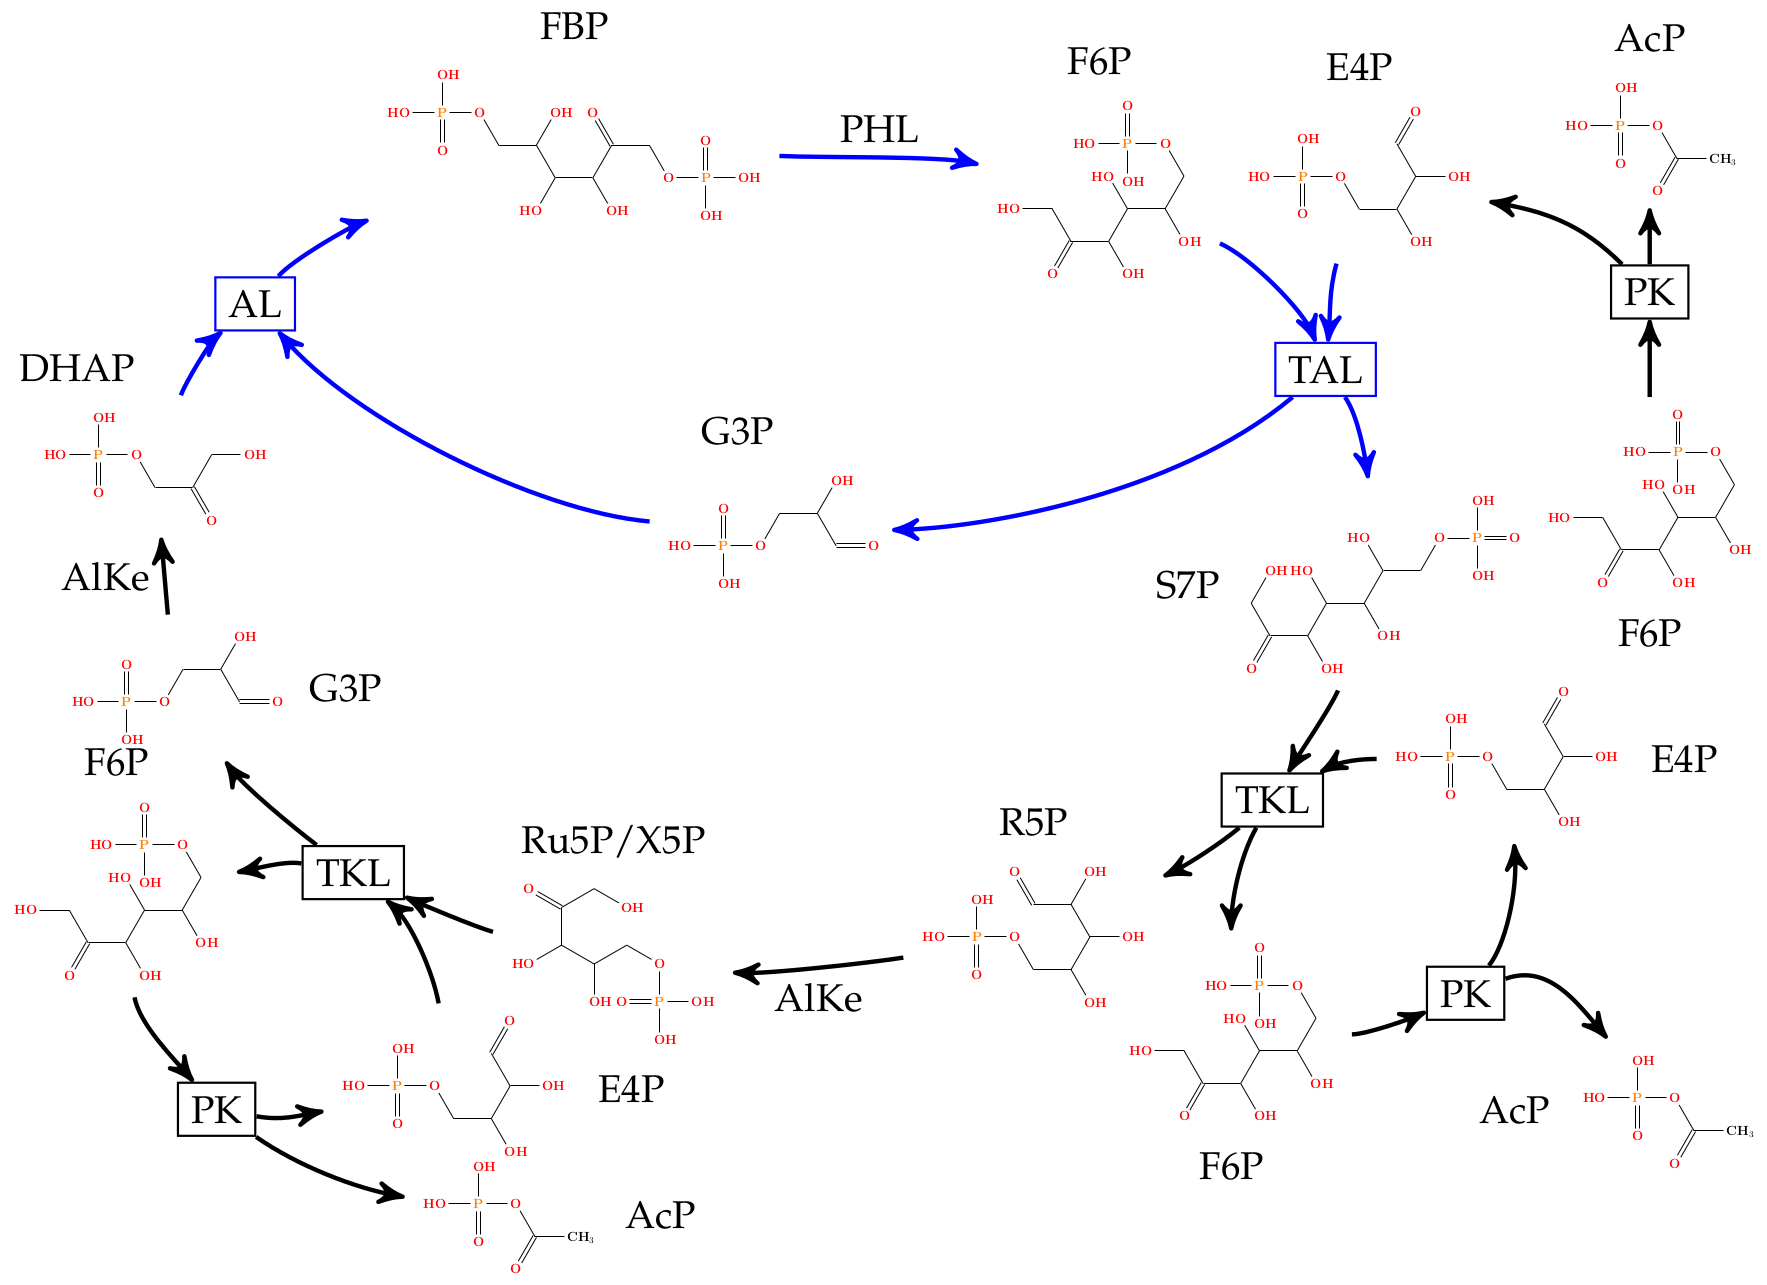 An automatically inferred pathway alternative to glycolysis.